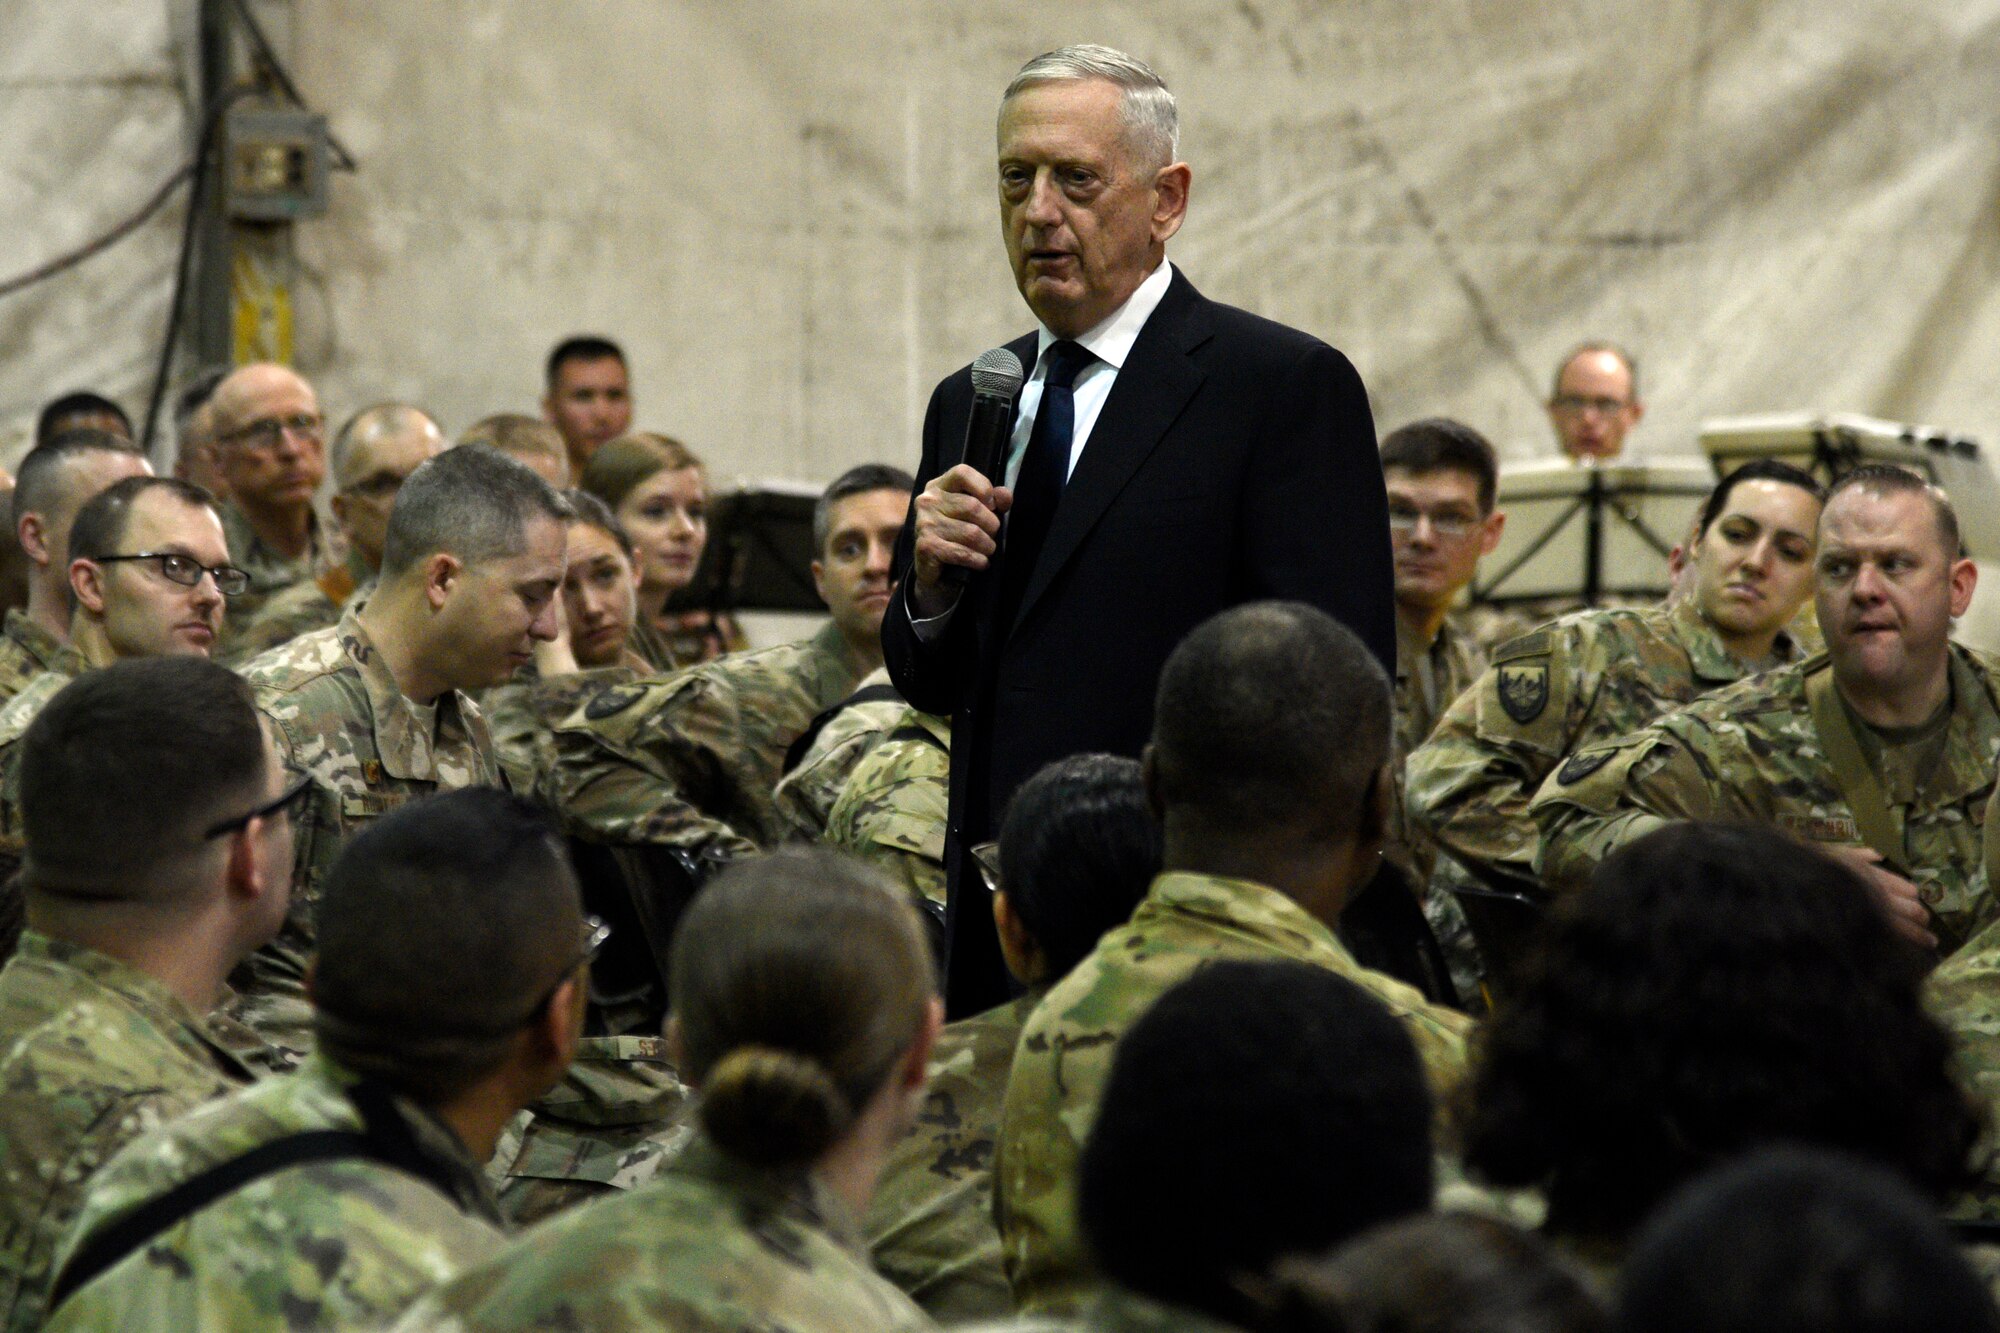 James Mattis, U.S. Secretary of Defense, conducts an all call with the men and women of Bagram Airfield, Afghanistan on Mar. 14, 2018.